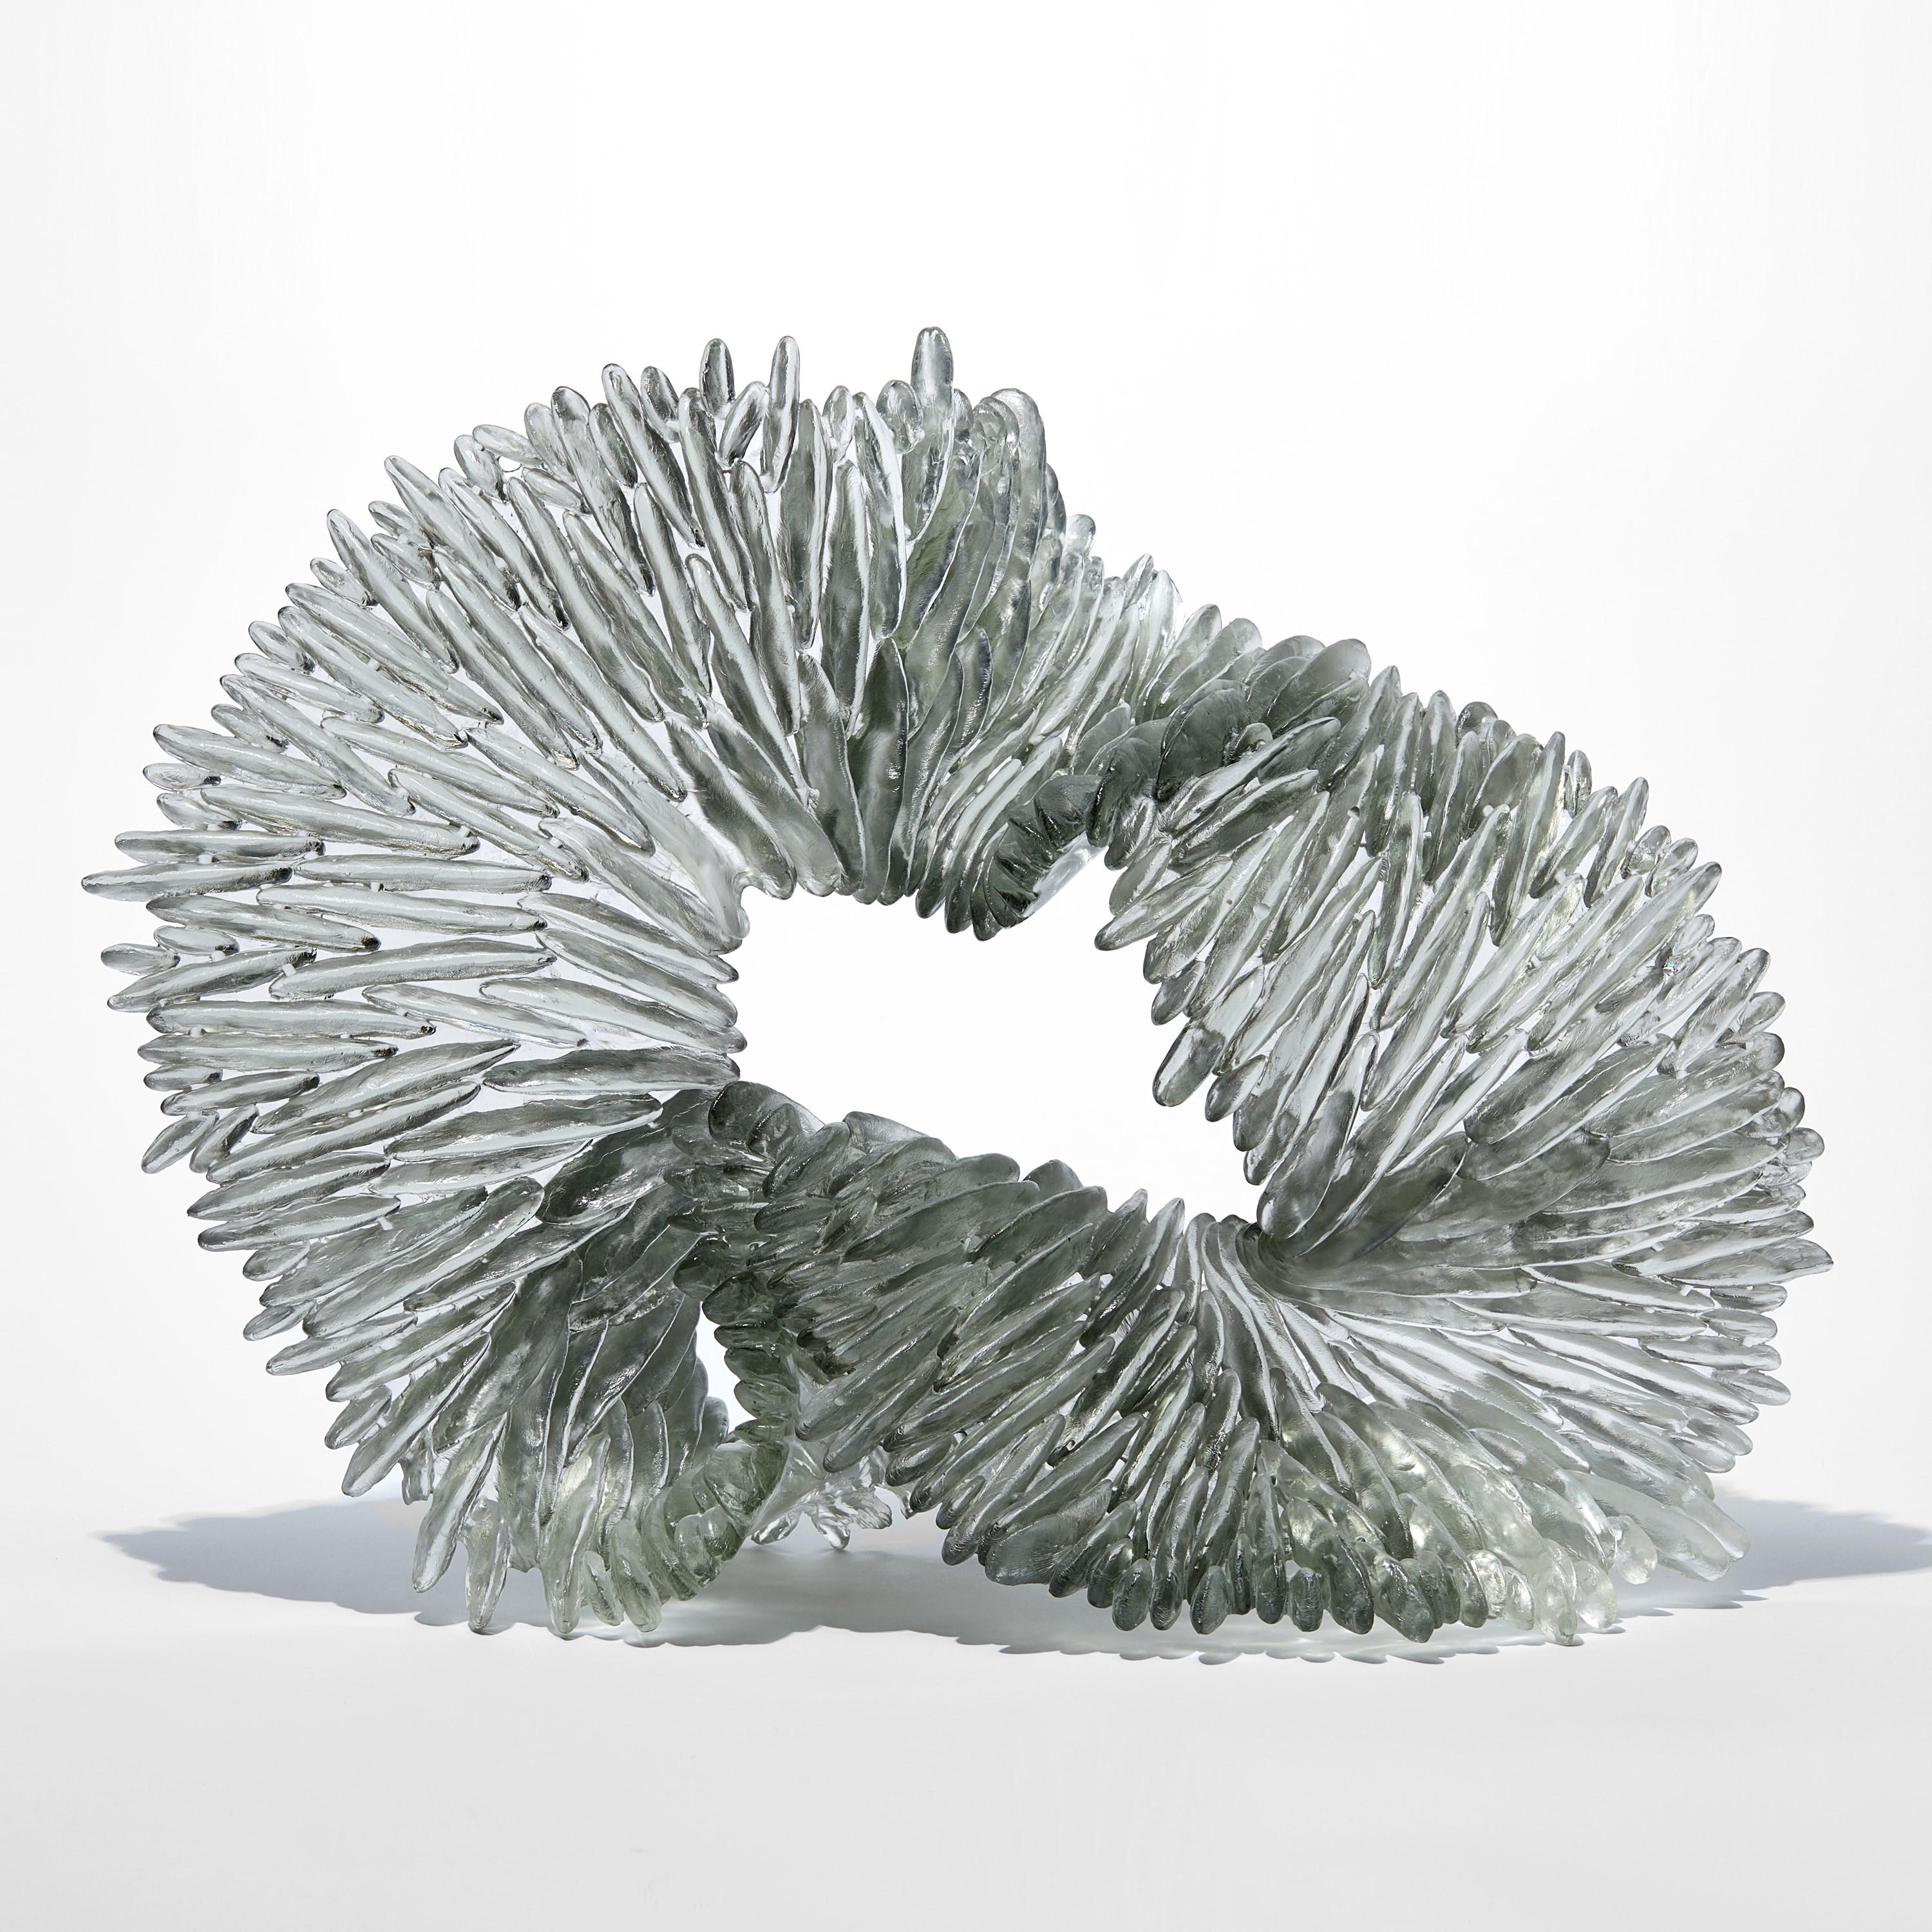 'Lamellae I' is a unique glass sculpture by the British artist, Nina Casson McGarva.

Casson McGarva firstly casts her glass in a flat mould where she introduces all of the beautifully detailed, scaled surface texture, all unique and to her distinct